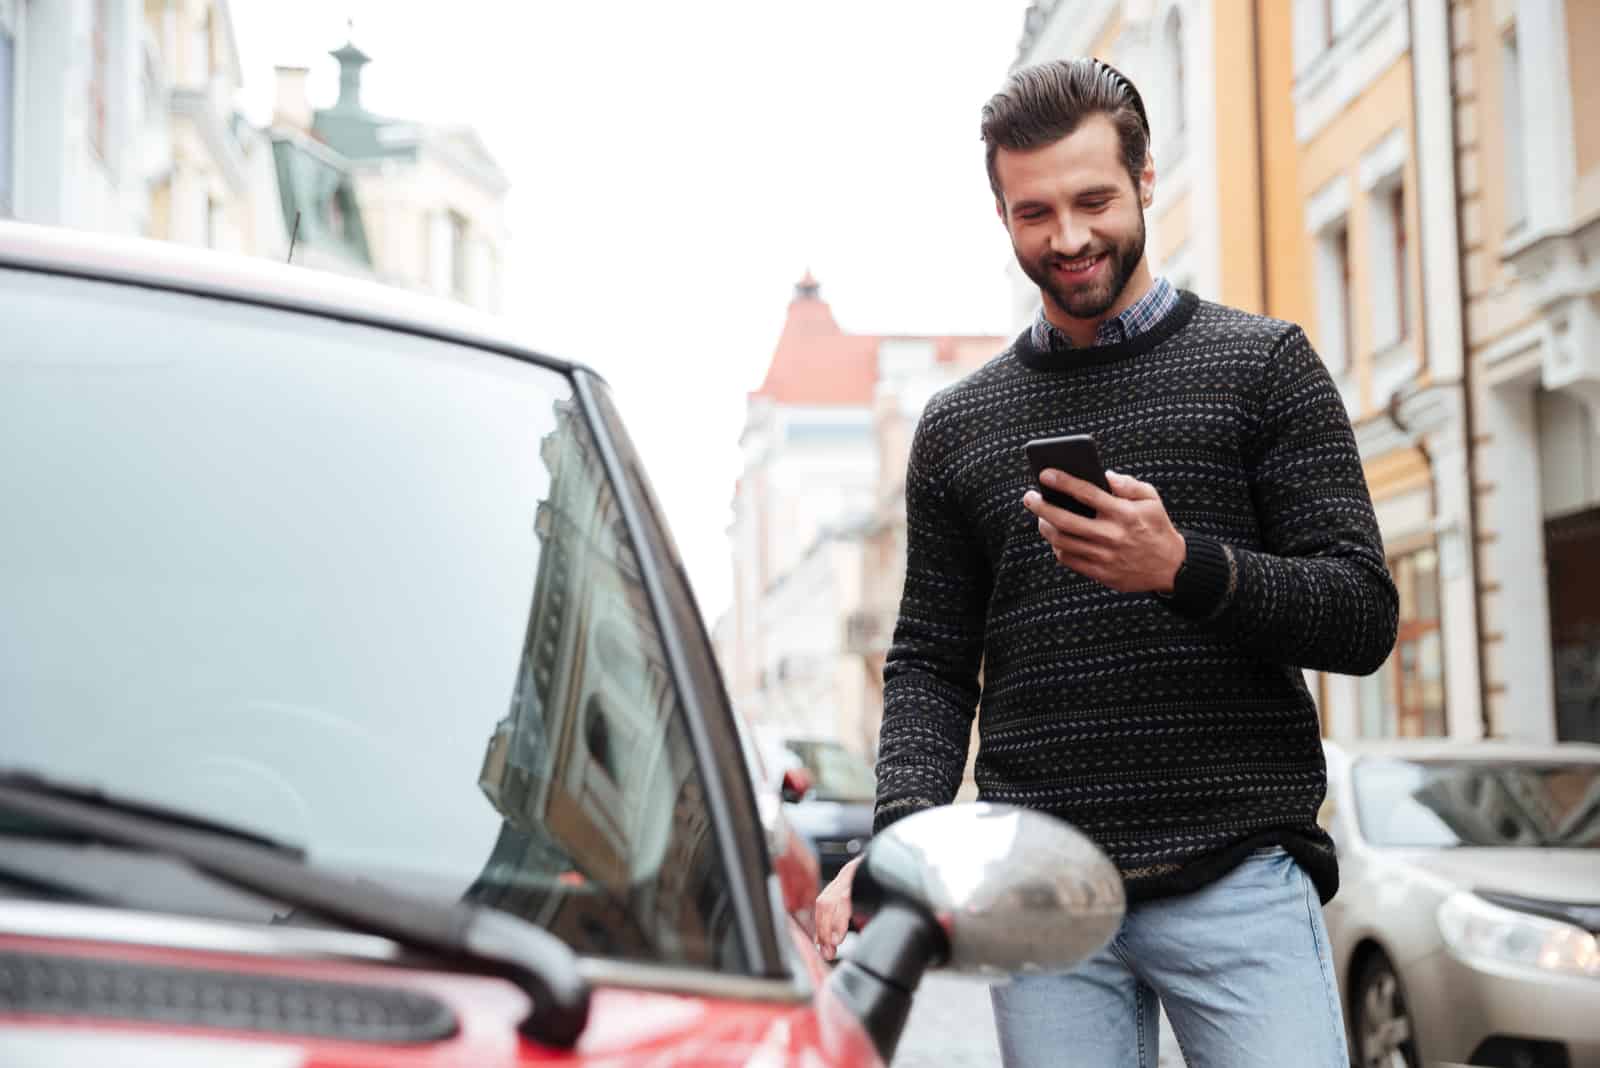 a smiling man stands next to a car and buttons on the phone